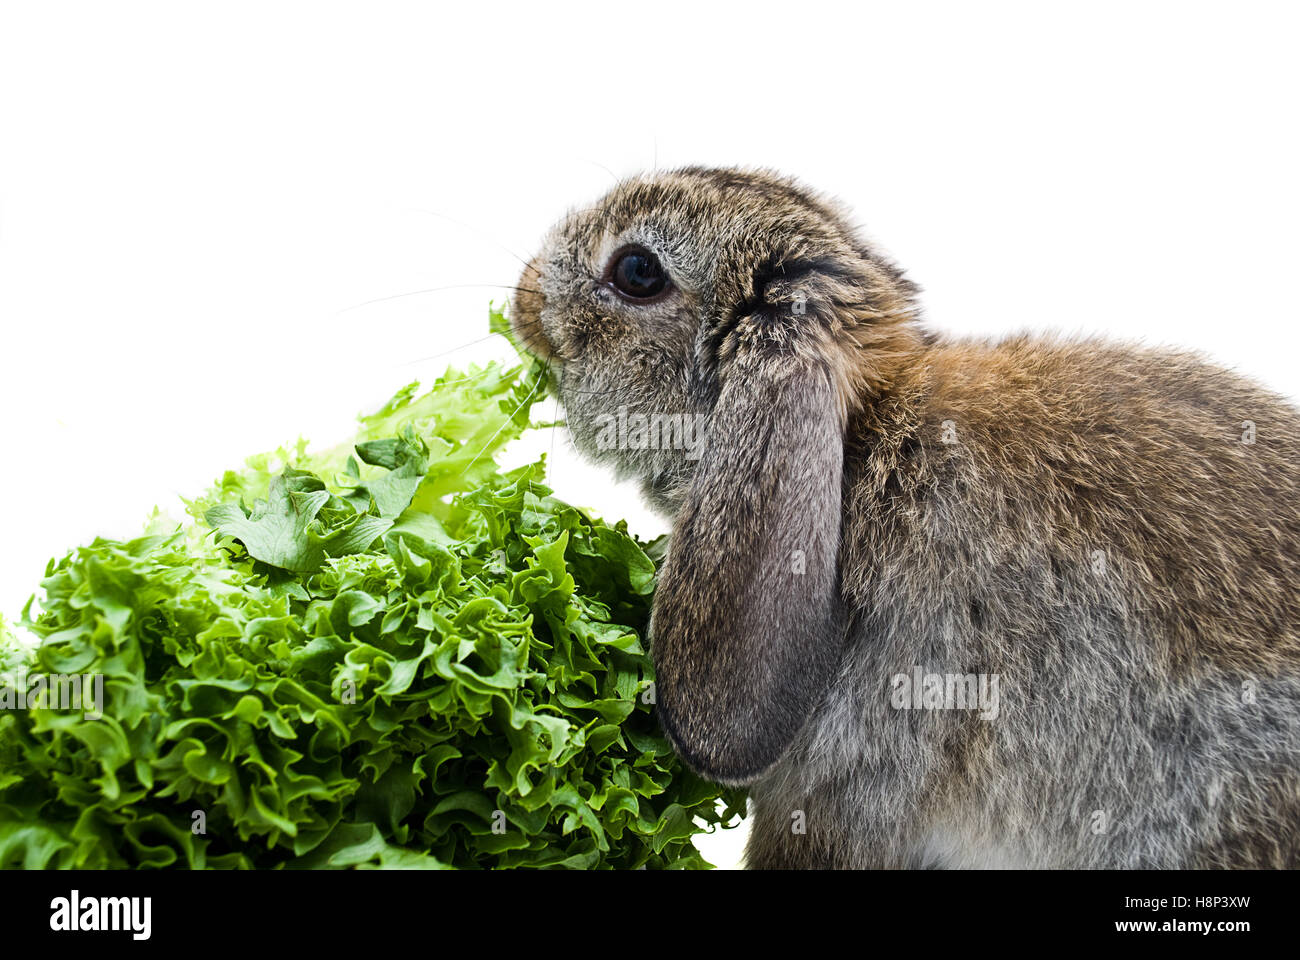 Baby Lop Ear Bunny eating lettuce. Stock Photo